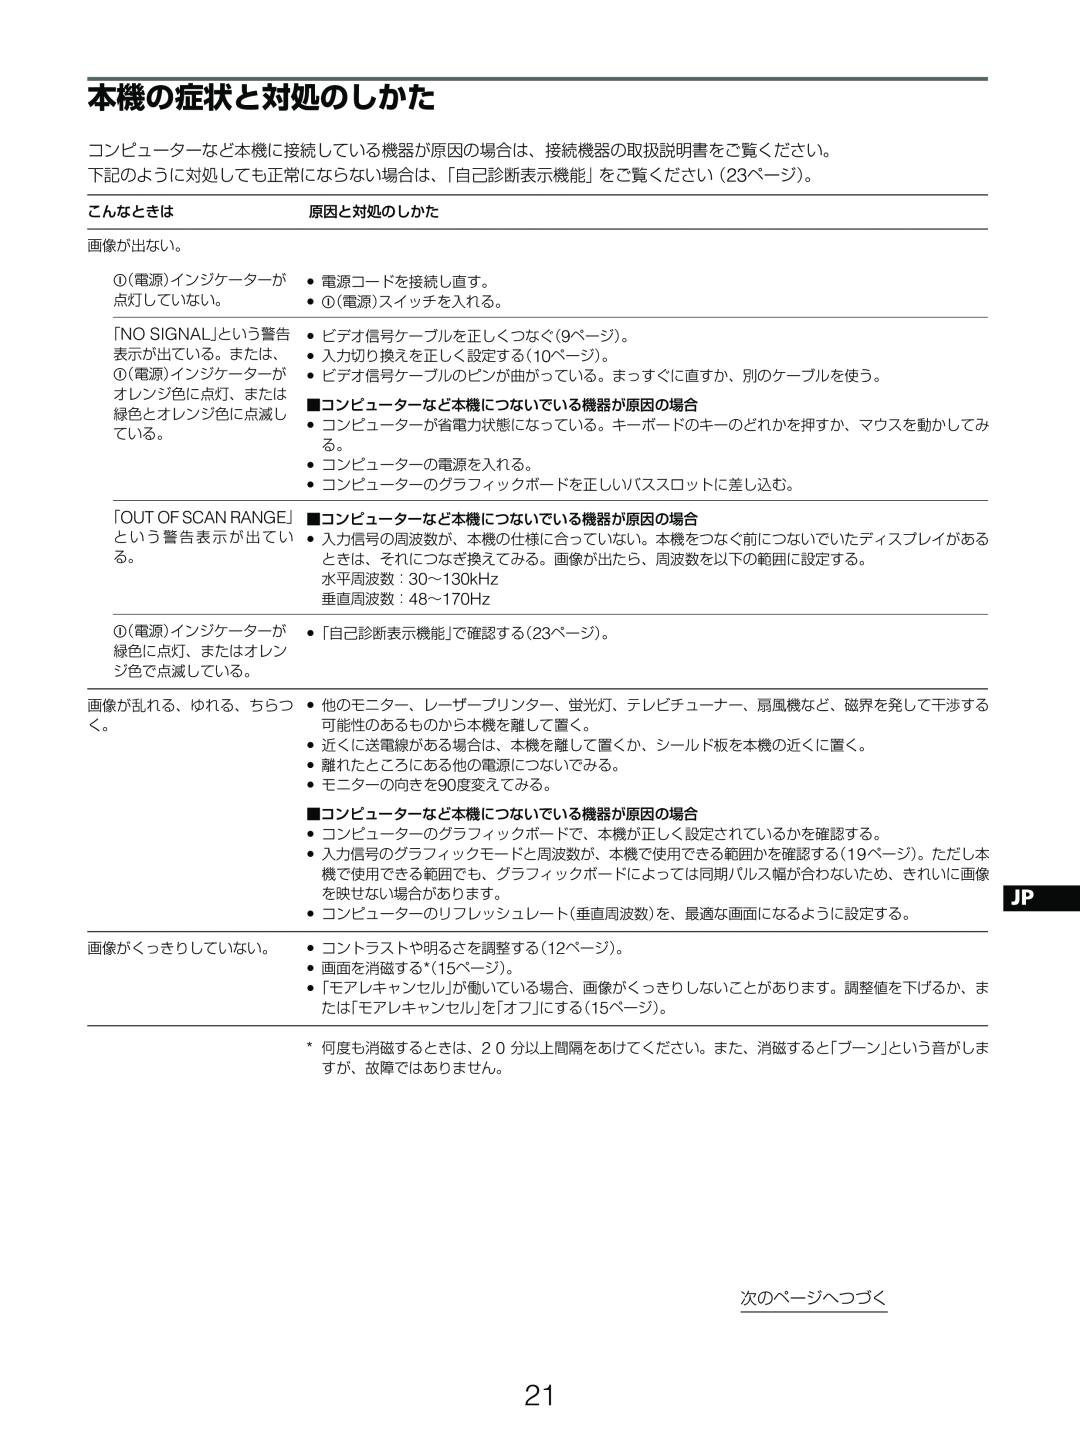 Sony GDM-5510 operating instructions 本機の症状と対処のしかた, 「No Signal」という警告, 水平周波数：30～130kHz 